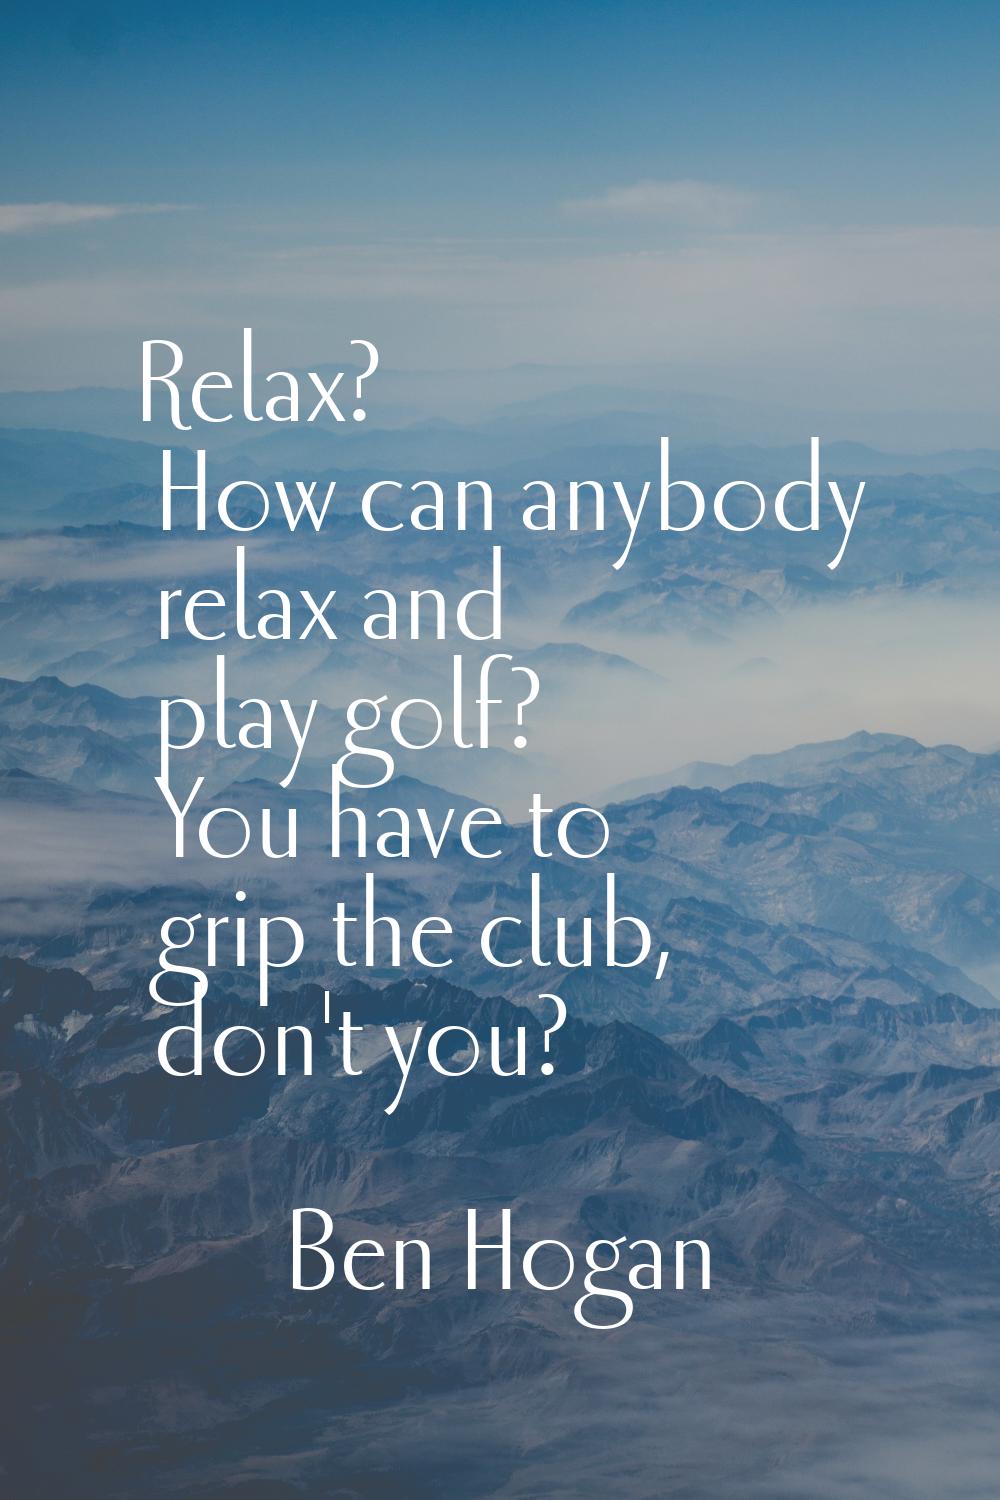 Relax? How can anybody relax and play golf? You have to grip the club, don't you?